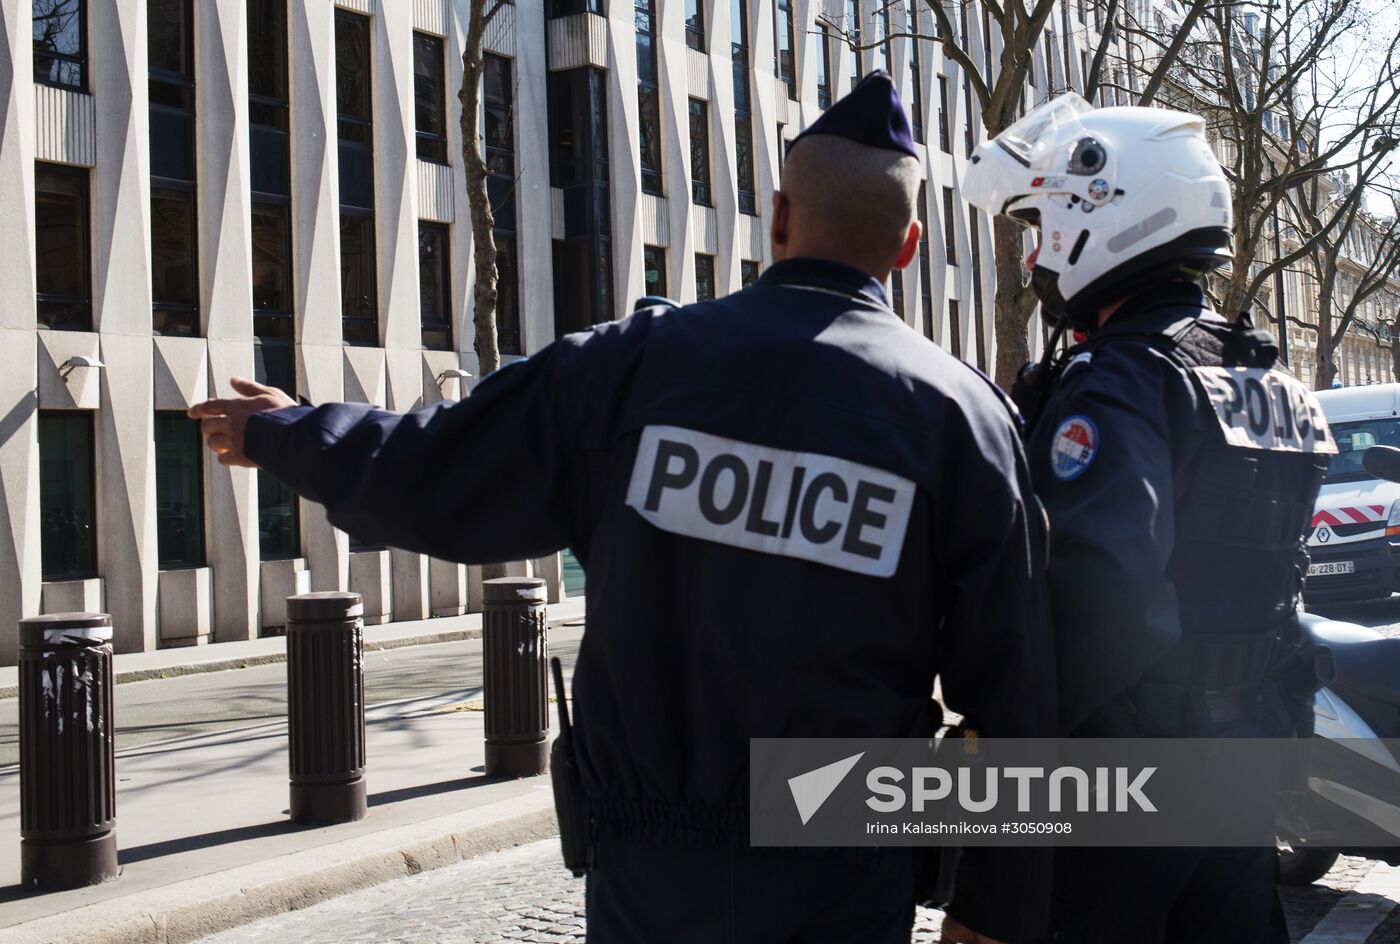 Explosion at IMF office in Paris